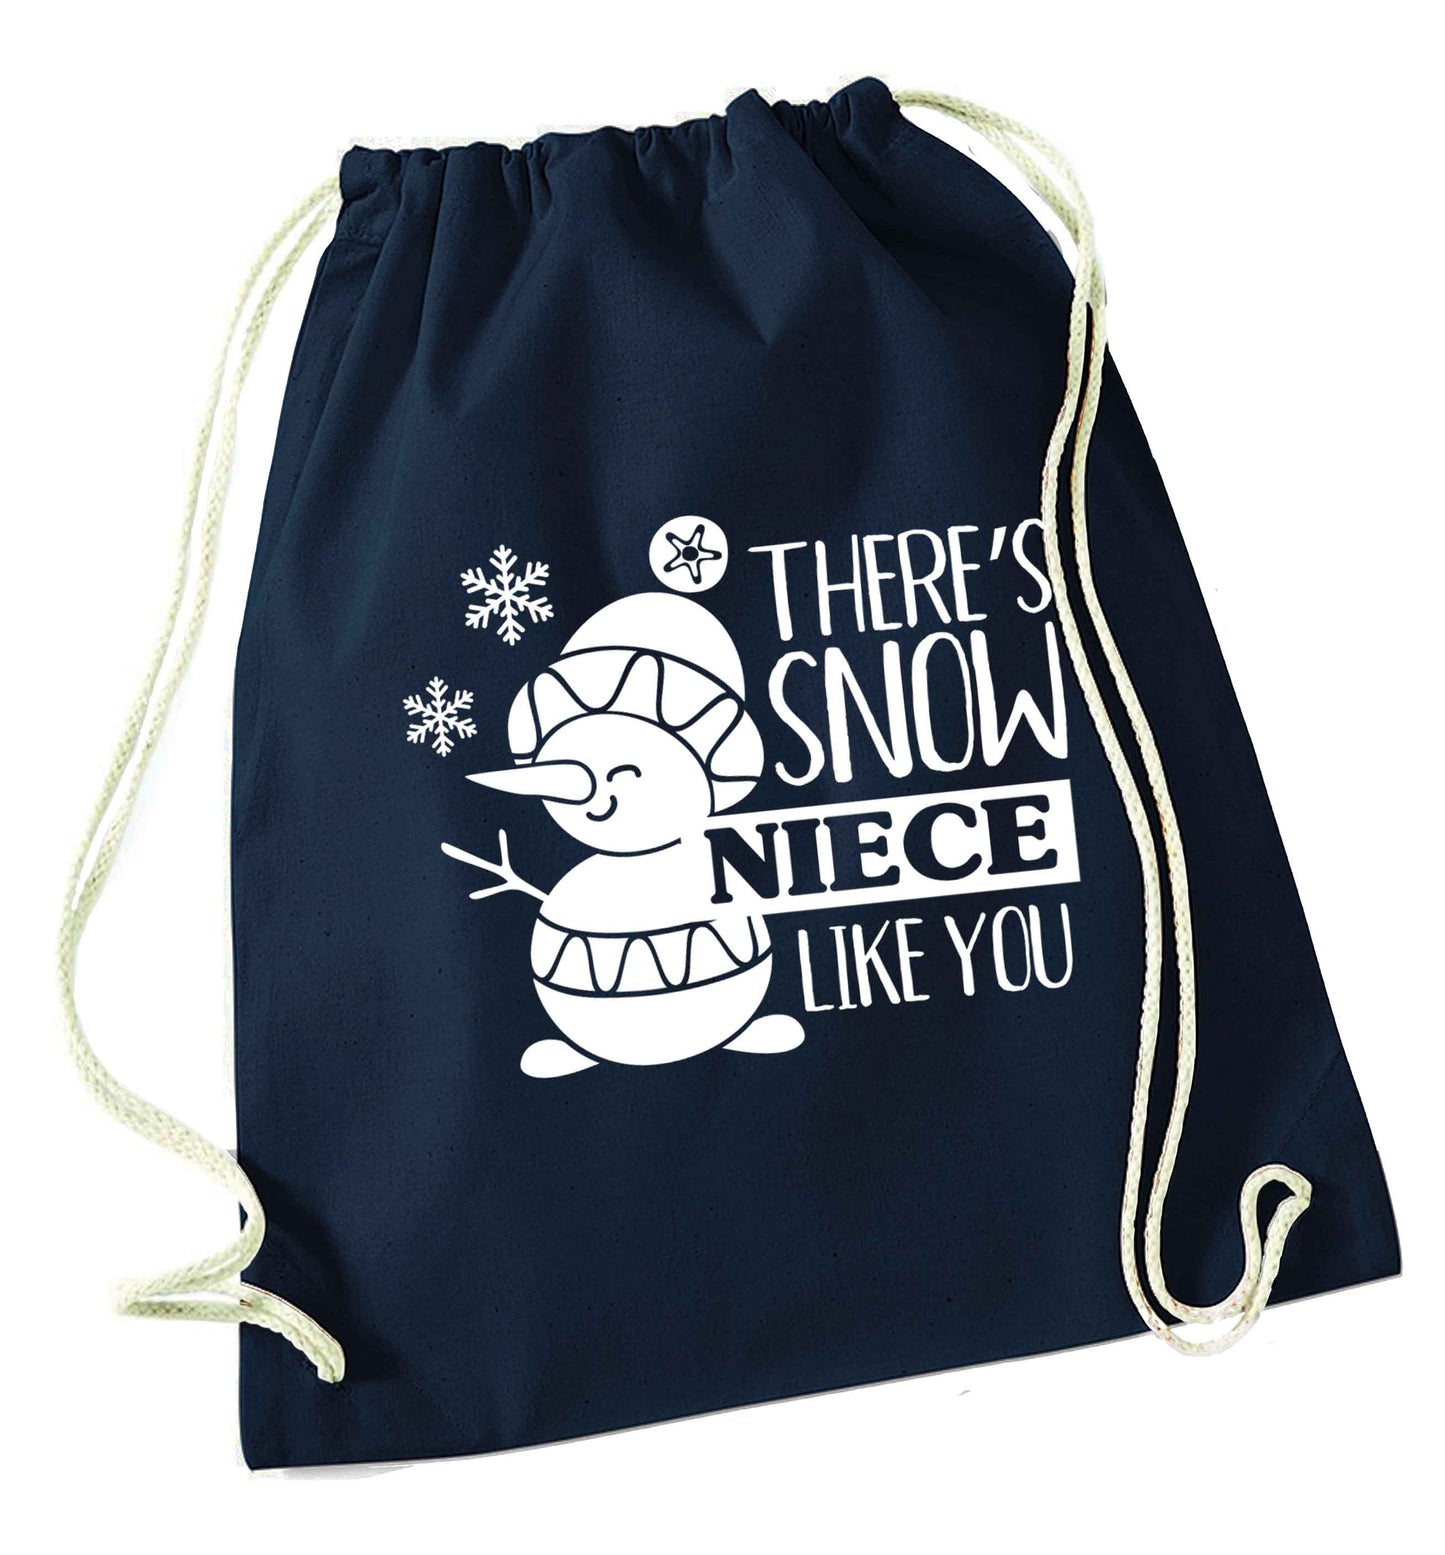 There's snow niece like you navy drawstring bag